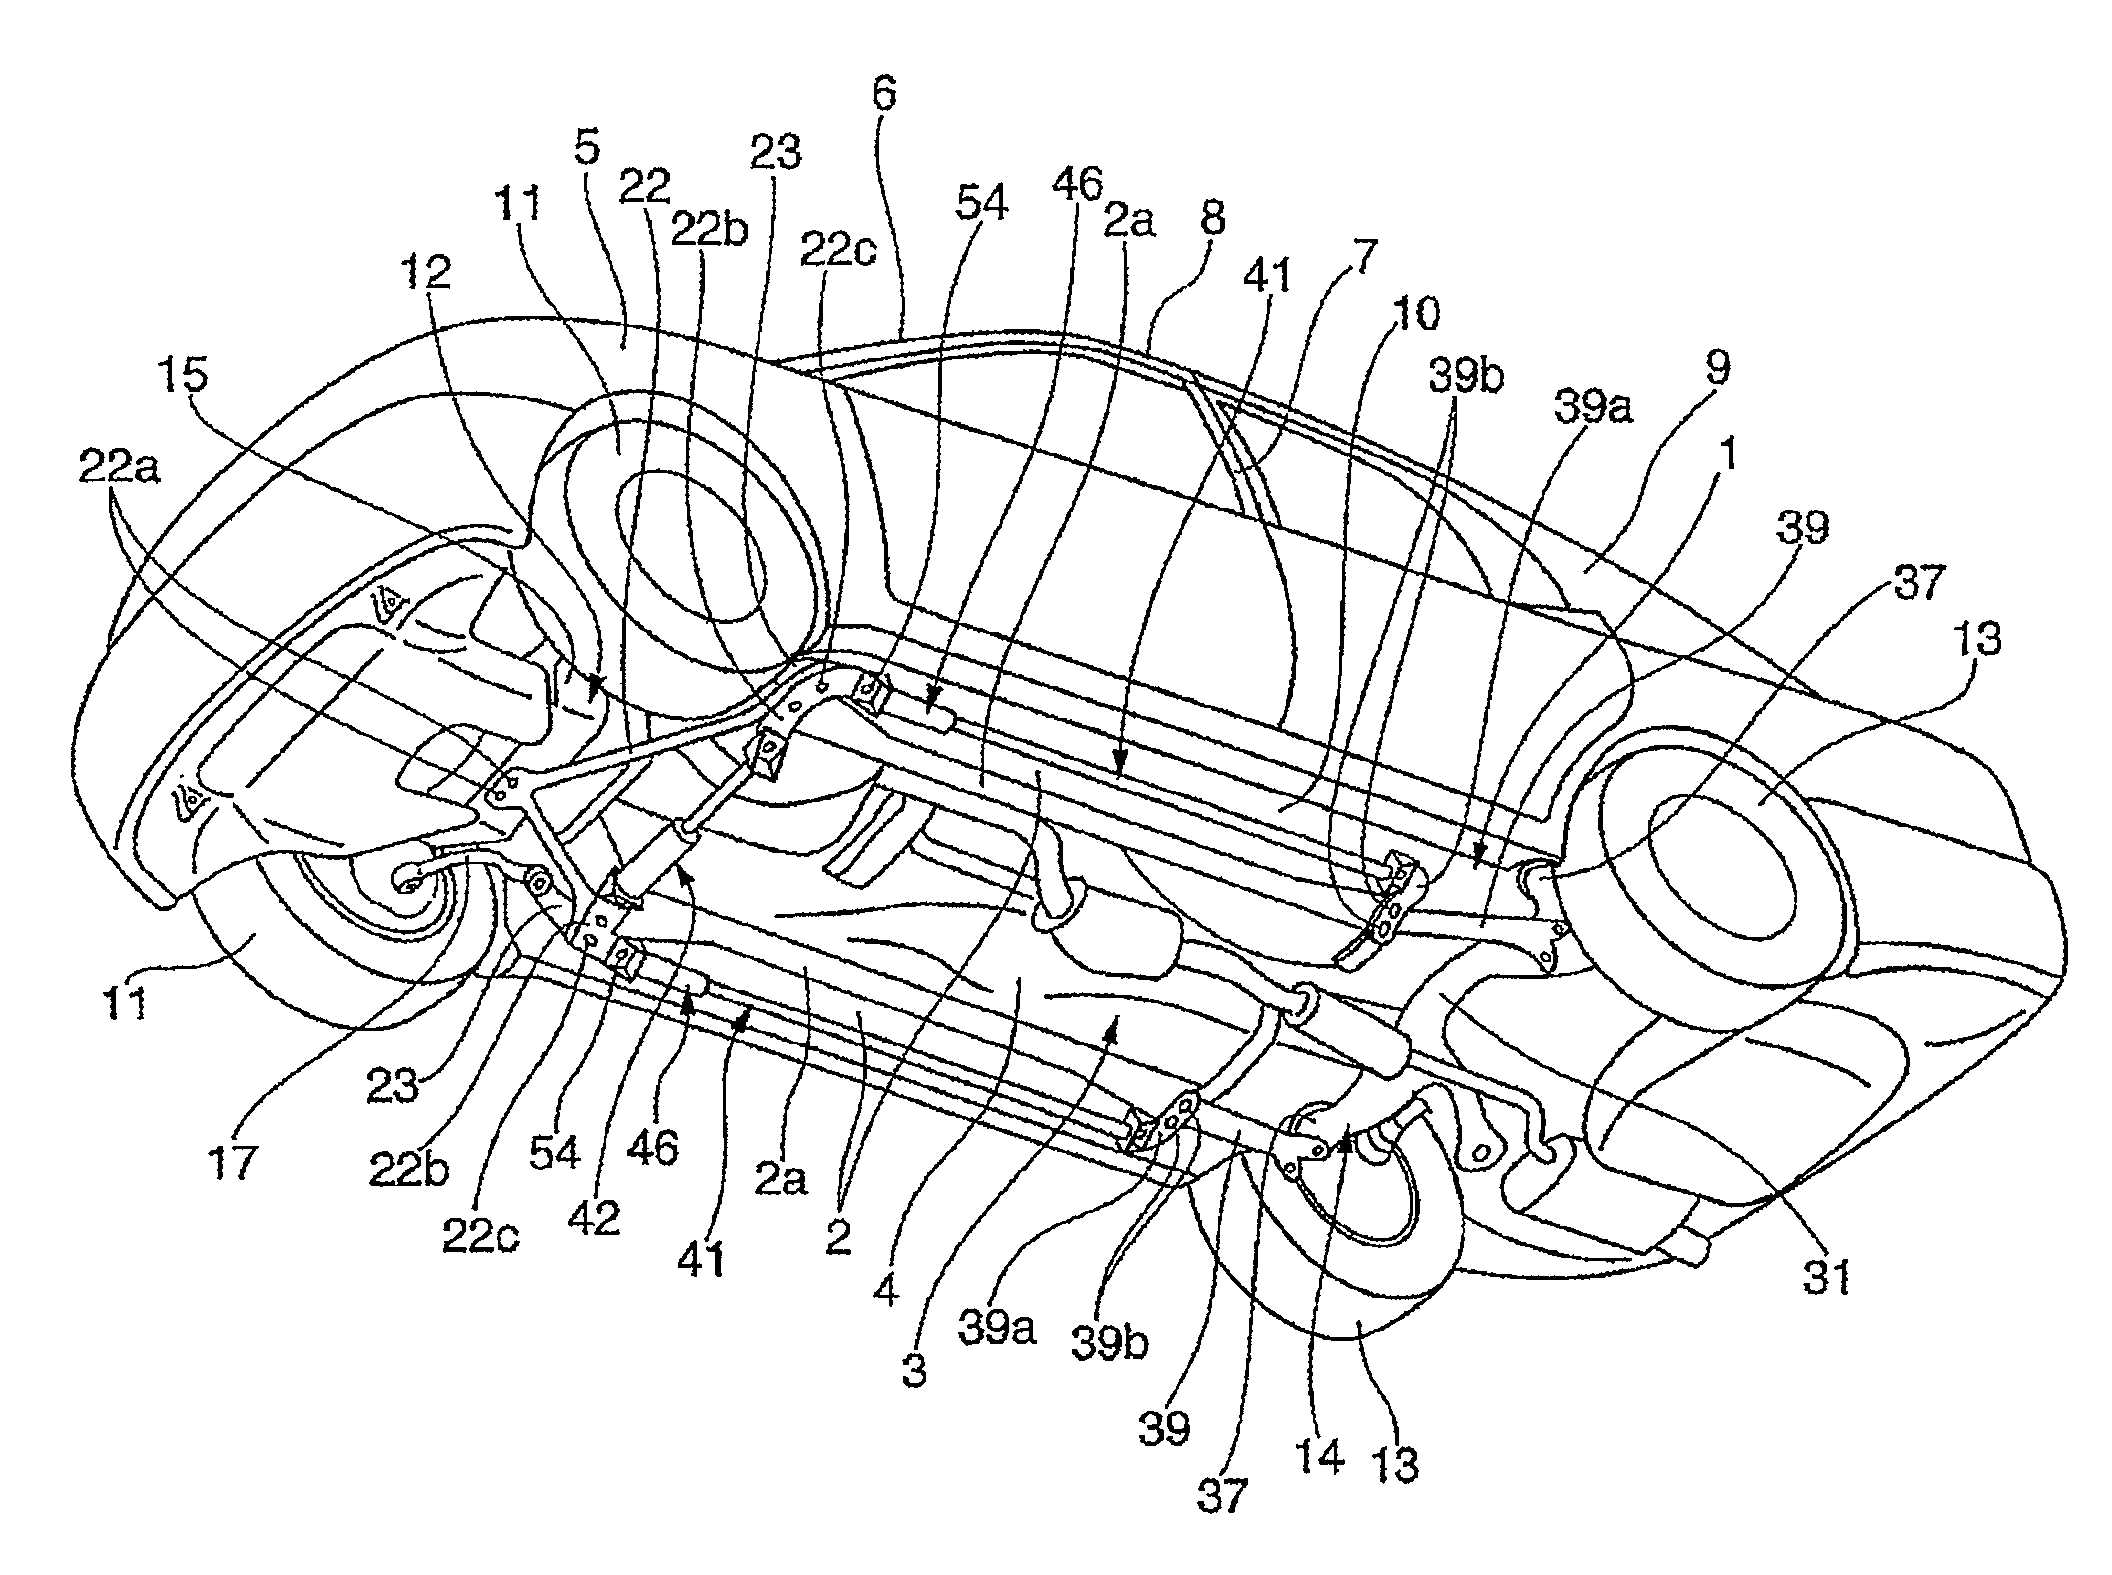 Device for reinforcing vehicle body of vehicle